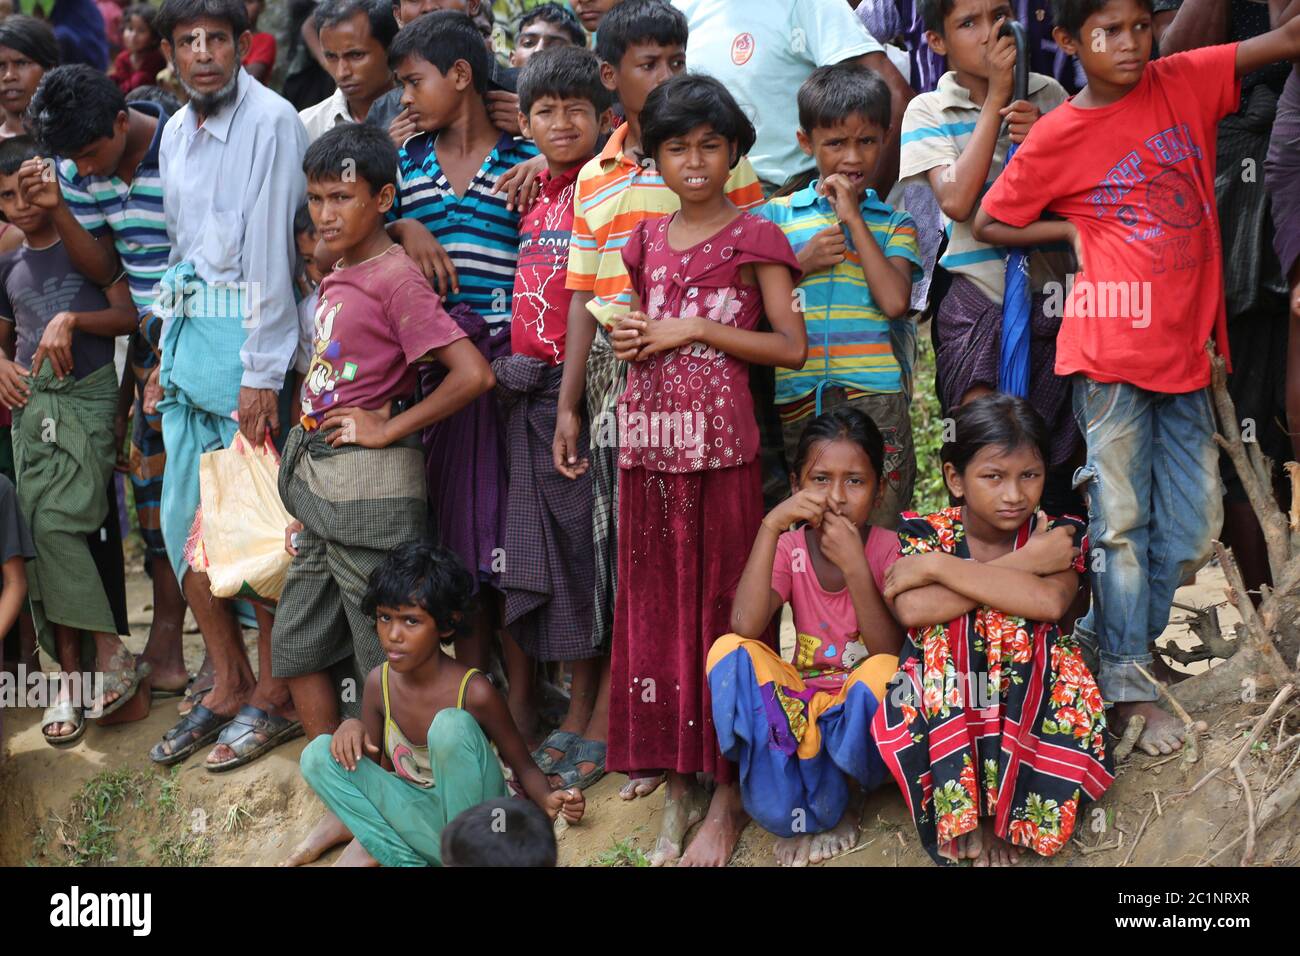 Rohingya people gather to collect food aid at Thangkhali refugee camp in Cox's Bazar, Bangladesh, Thursday, Oct. 5, 2017. Stock Photo